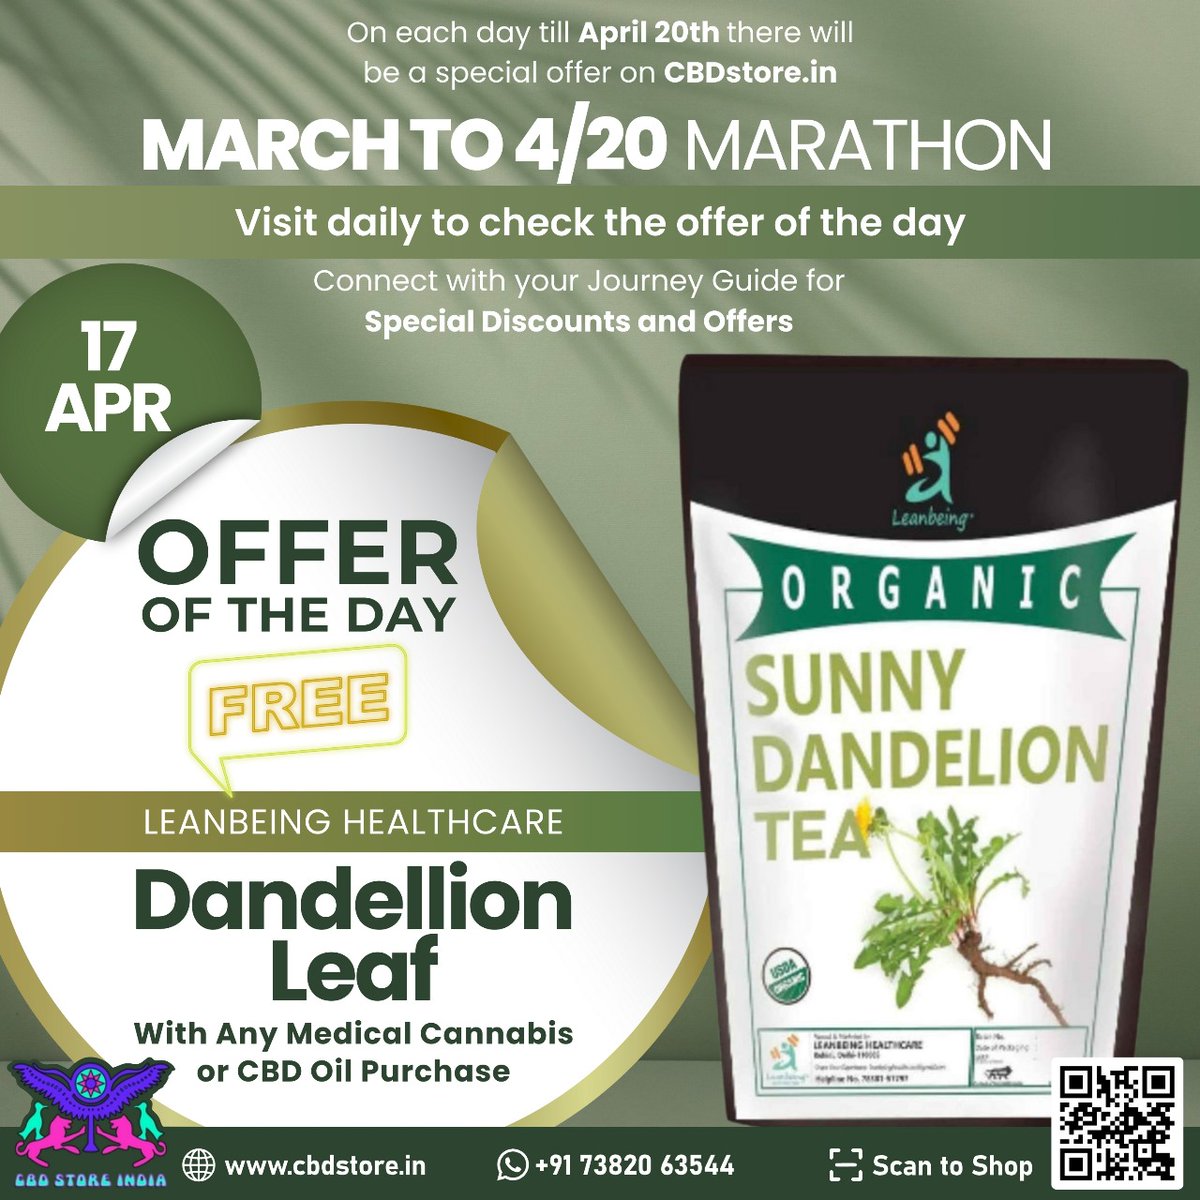 😍Today's treat: FREE Leanbeing Healthcare - Dandellion Leaf Tea with any Medical Cannabis or CBD Oil Purchase

Connect with your Journey Guide for personalized vouchers and offers. cbdstore.in/collections/he…

#medicalcannabis #cbdoil #cannabisoil #cannabiscommunity